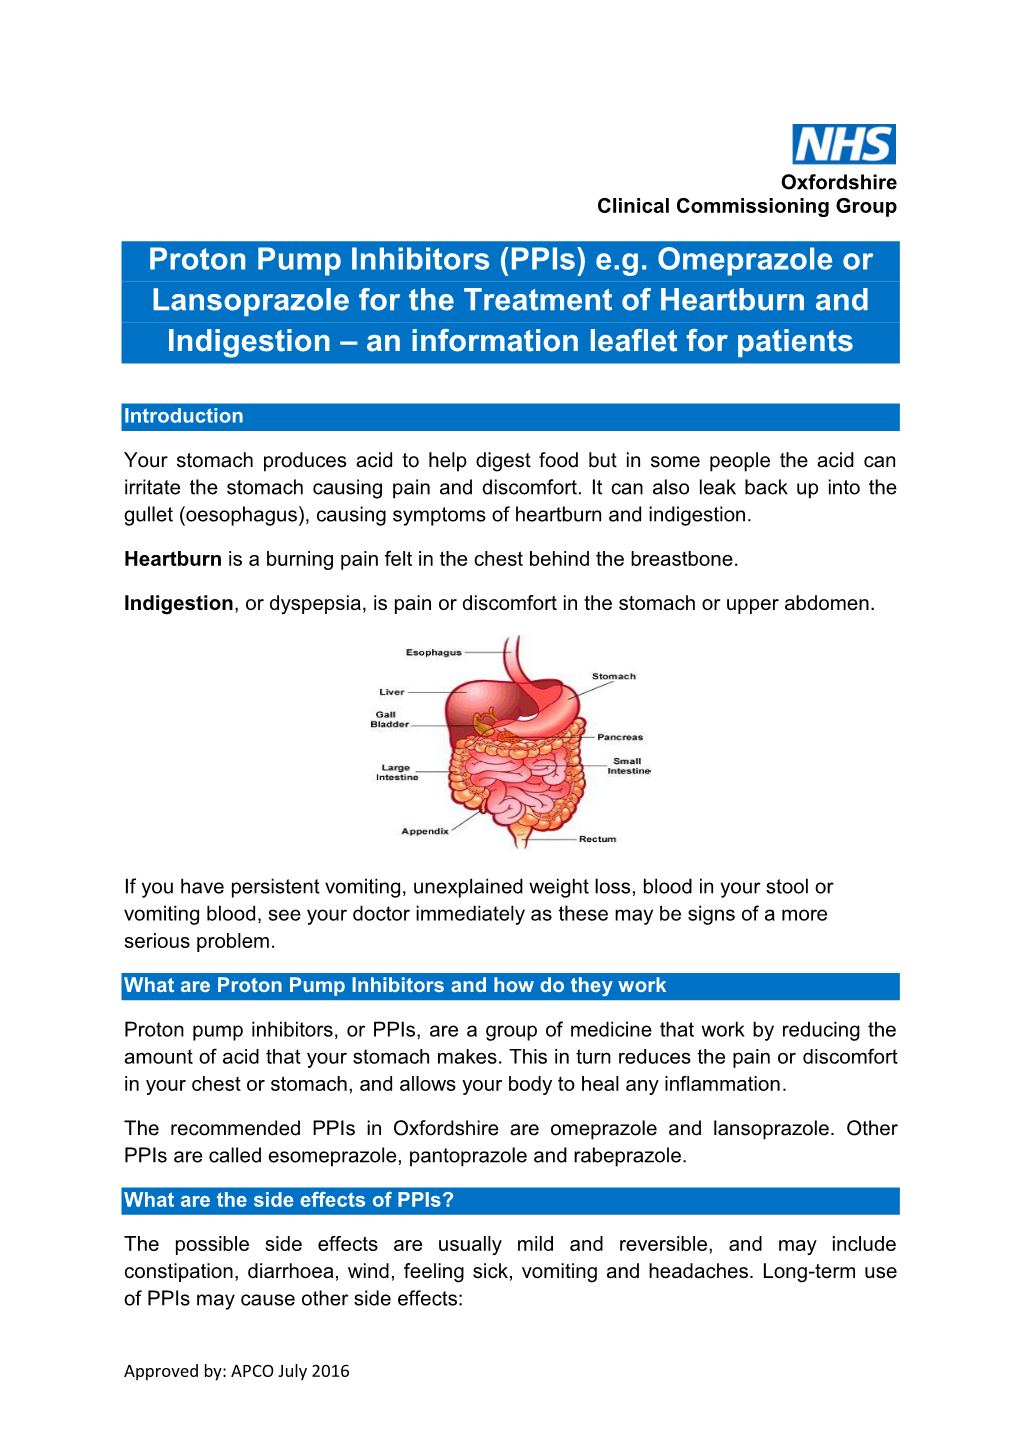 Proton Pump Inhibitors (Ppis) E.G. Omeprazole Or Lansoprazole for the Treatment of Heartburn and Indigestion – an Information Leaflet for Patients